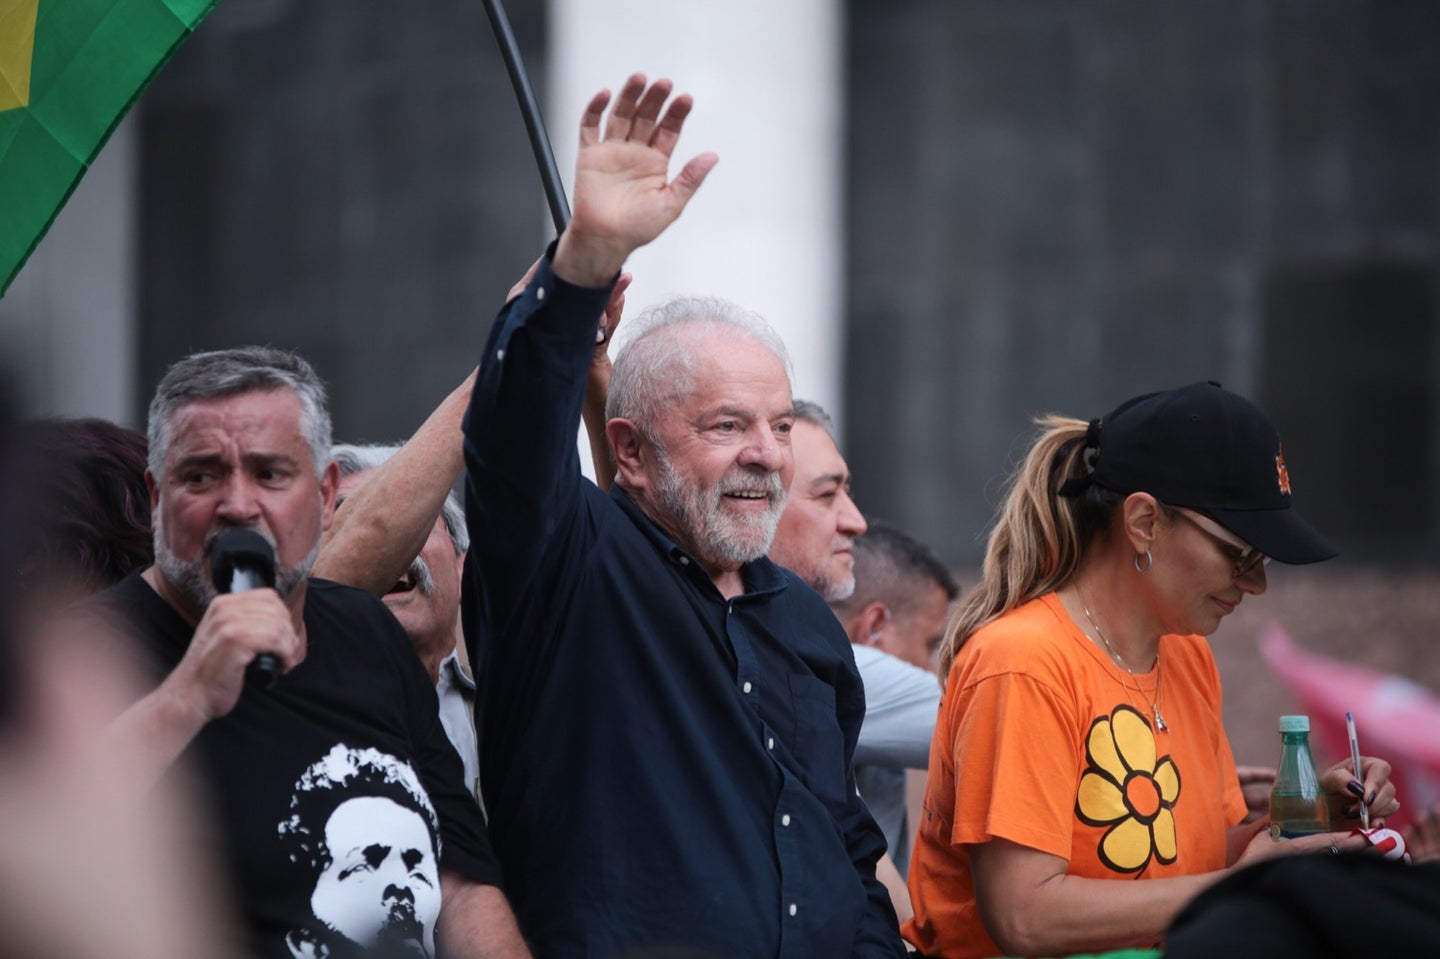 a man with white hair and a short beard waves at a presidential election rally